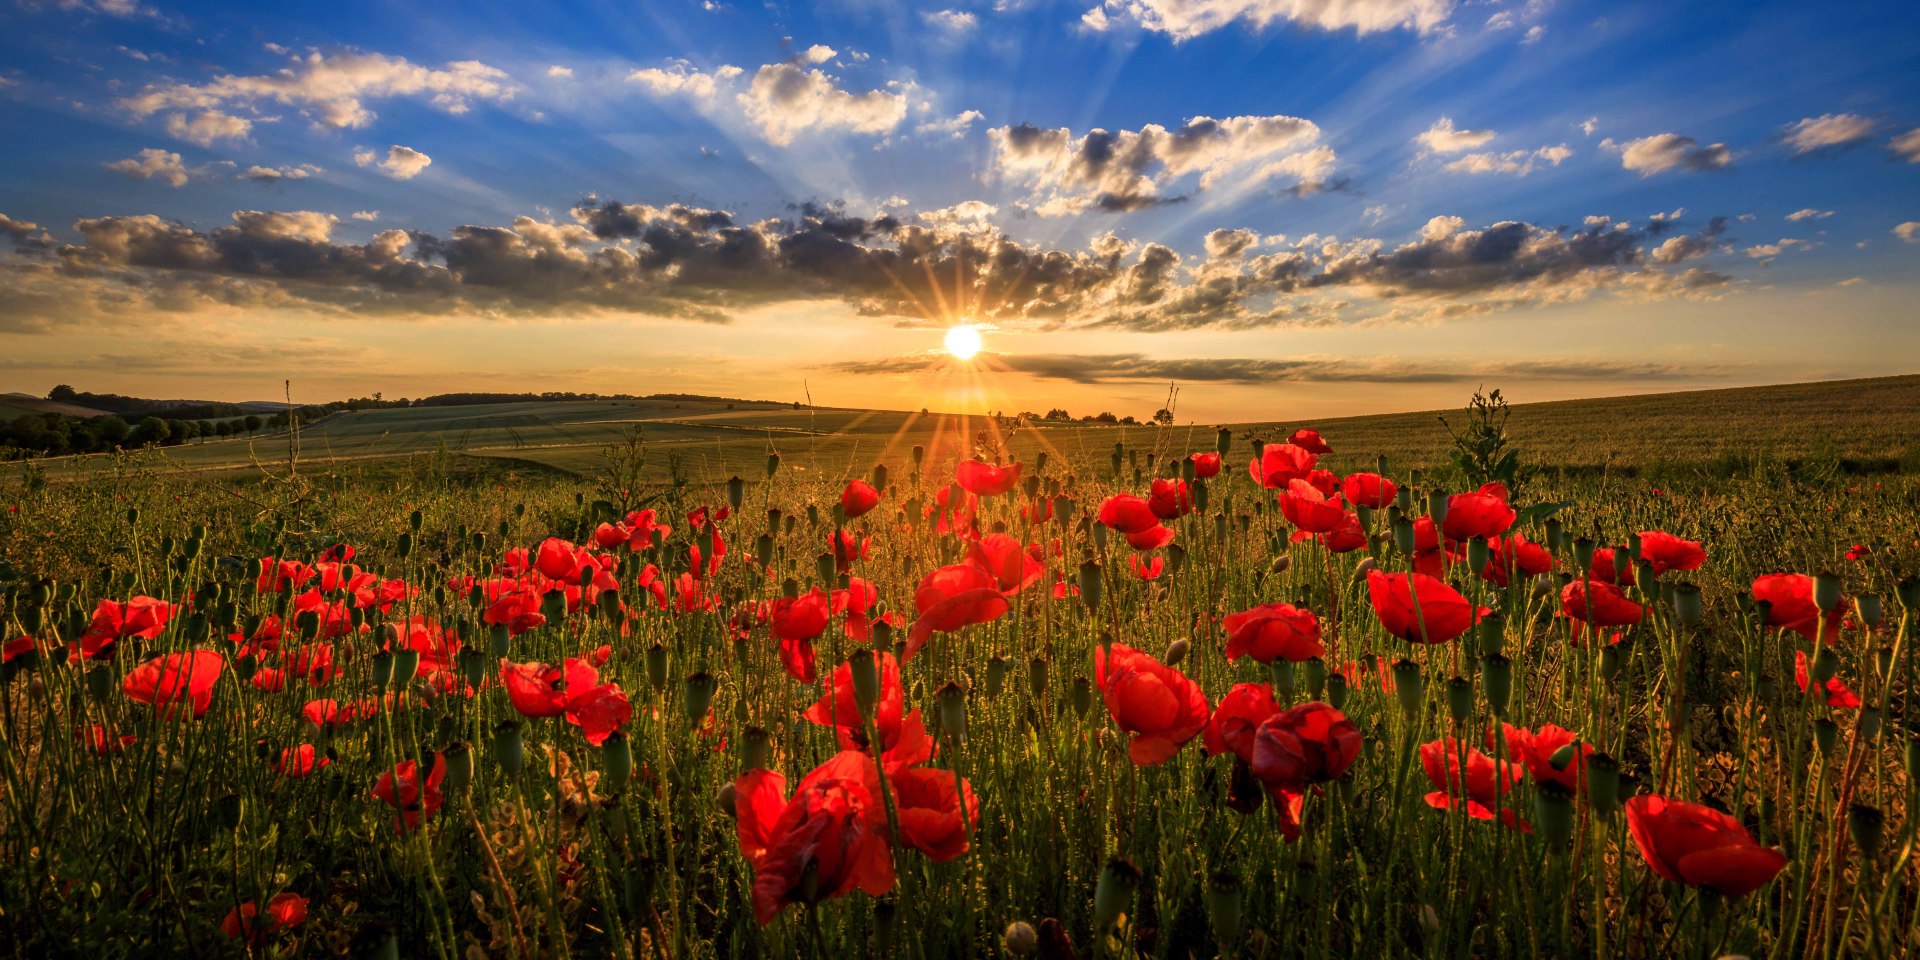 Low sun over poppies and cereal fields, © TMN / Lars Gerhardts